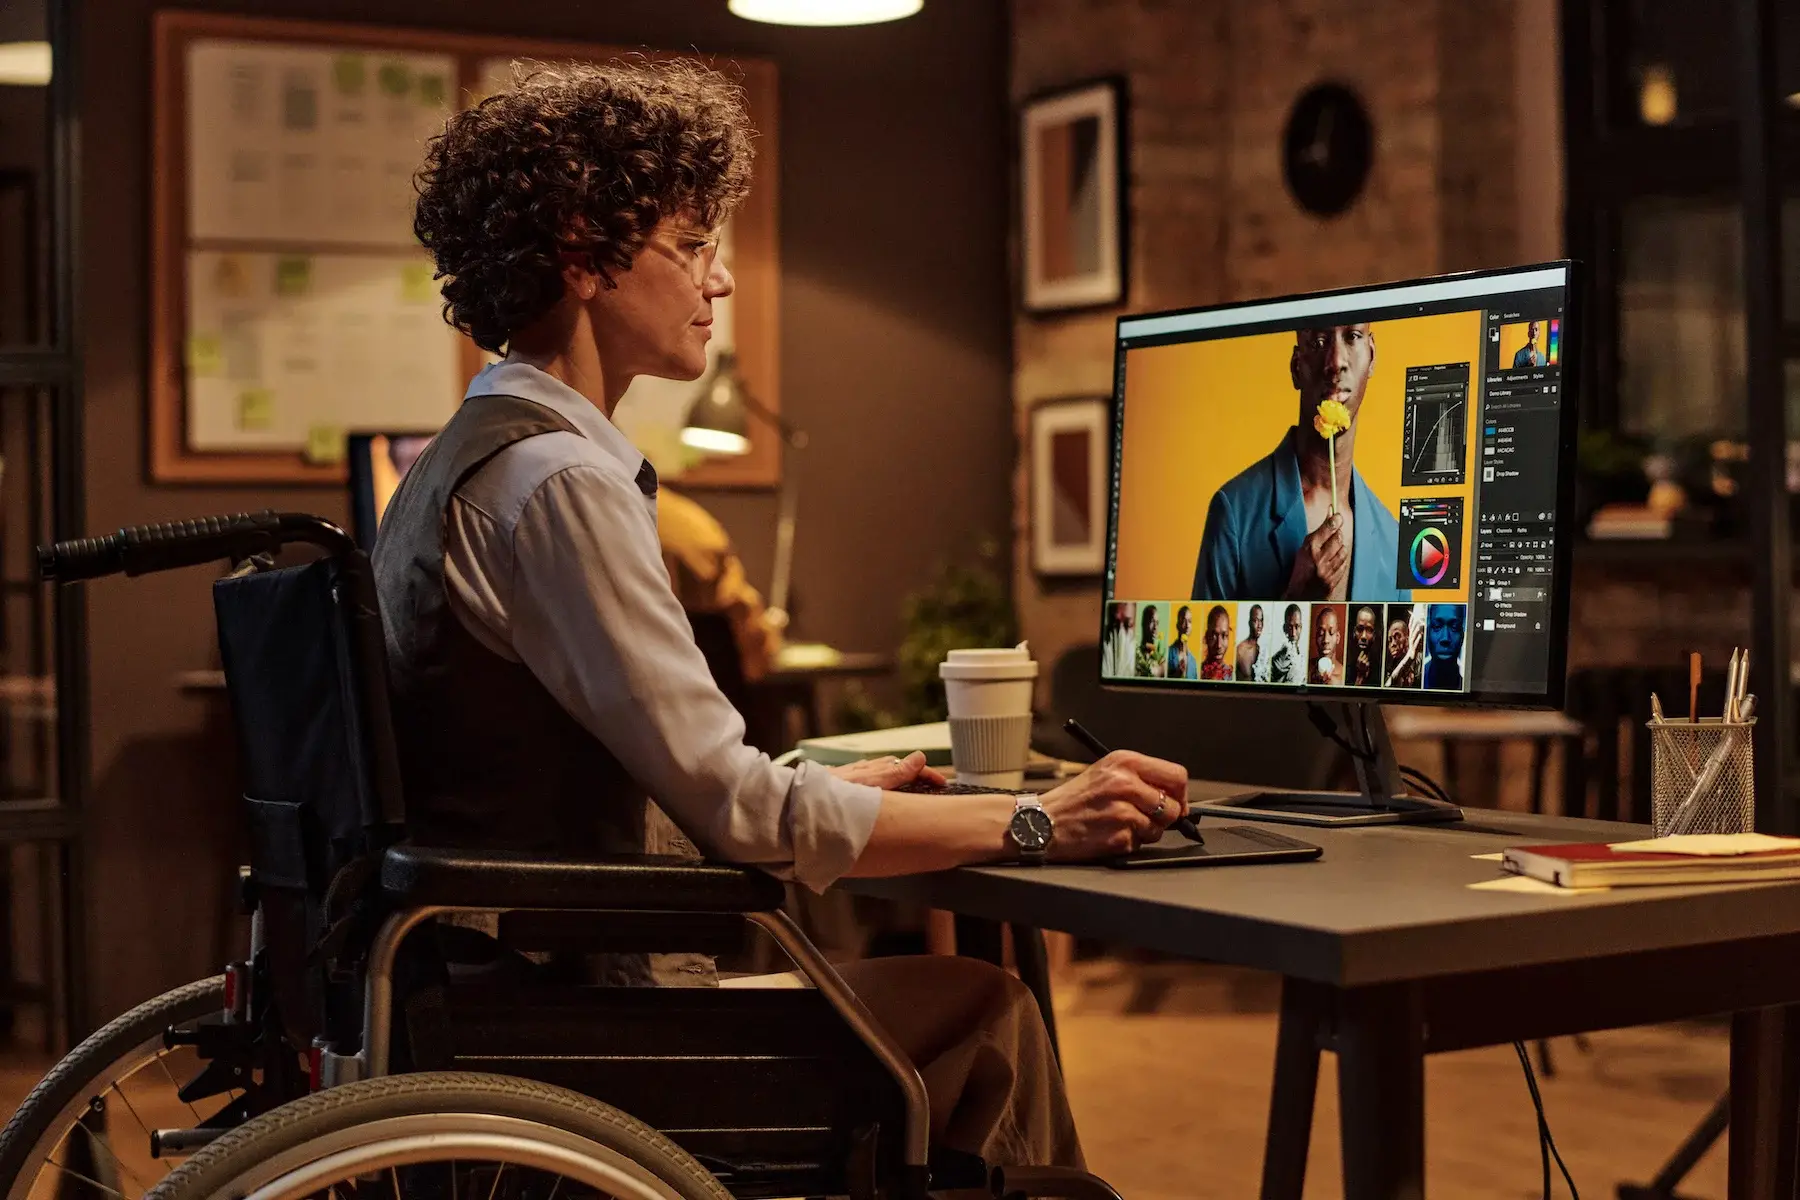 A graphic designer sits at a desk in their wheelchair editing images with a creative software